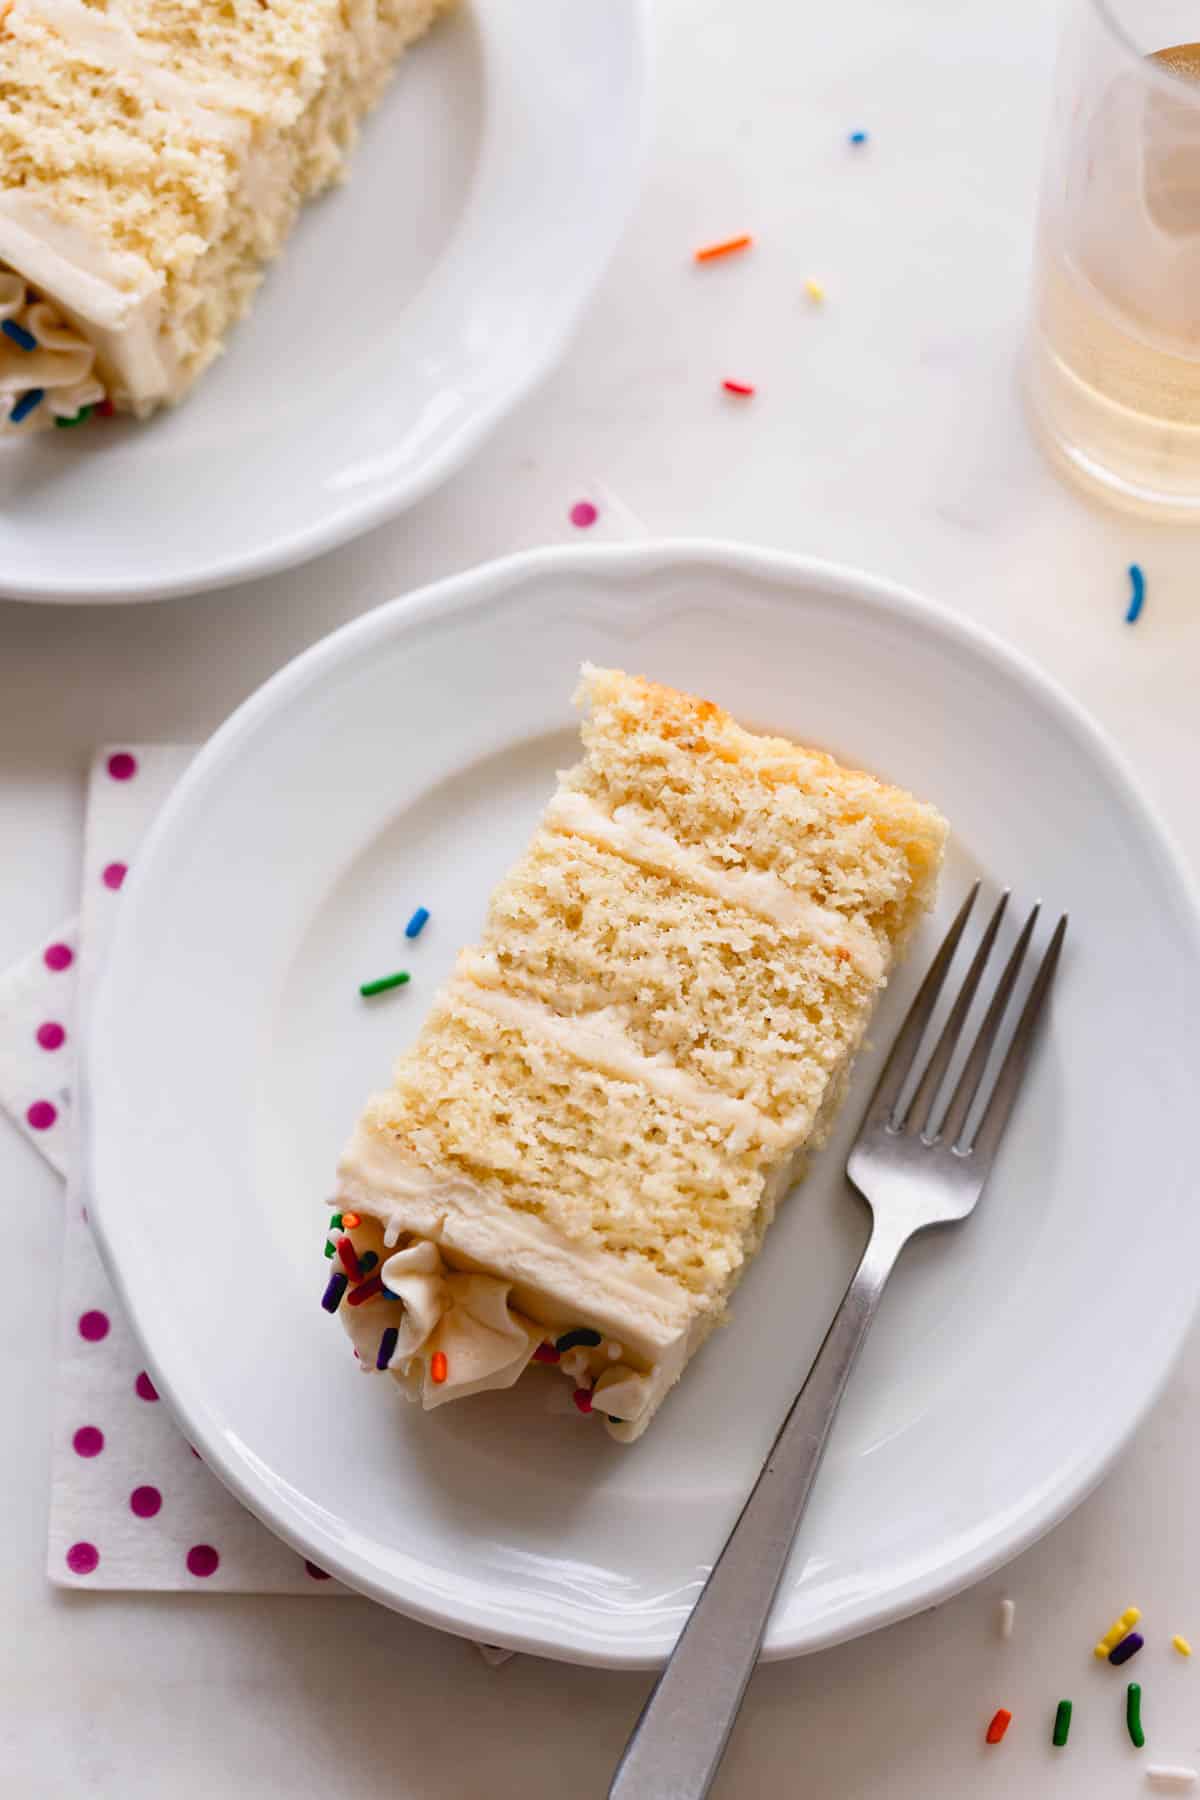 A slice of vanilla bean cake with vanilla Russian buttercream on a plate with a fork.